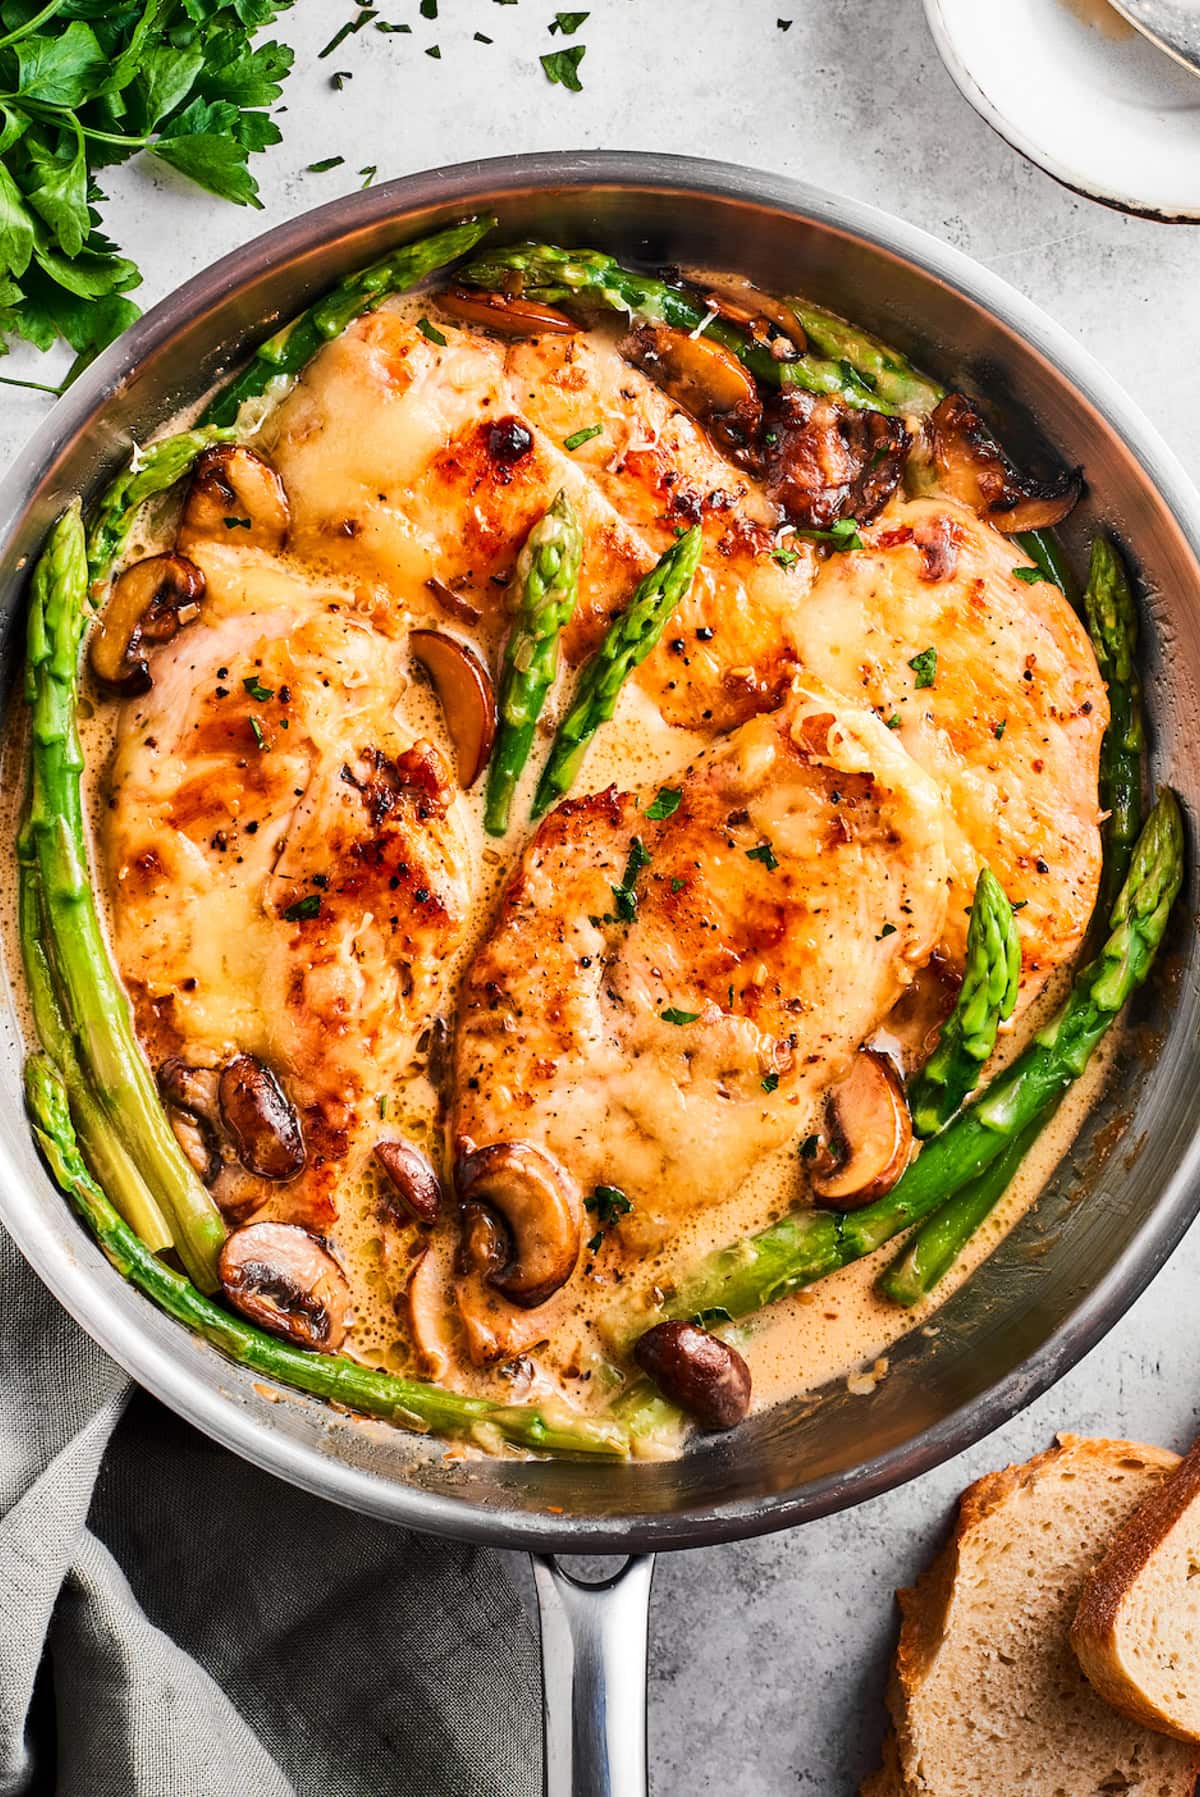 A skillet with a few cooked chicken breasts and asparagus stalks.